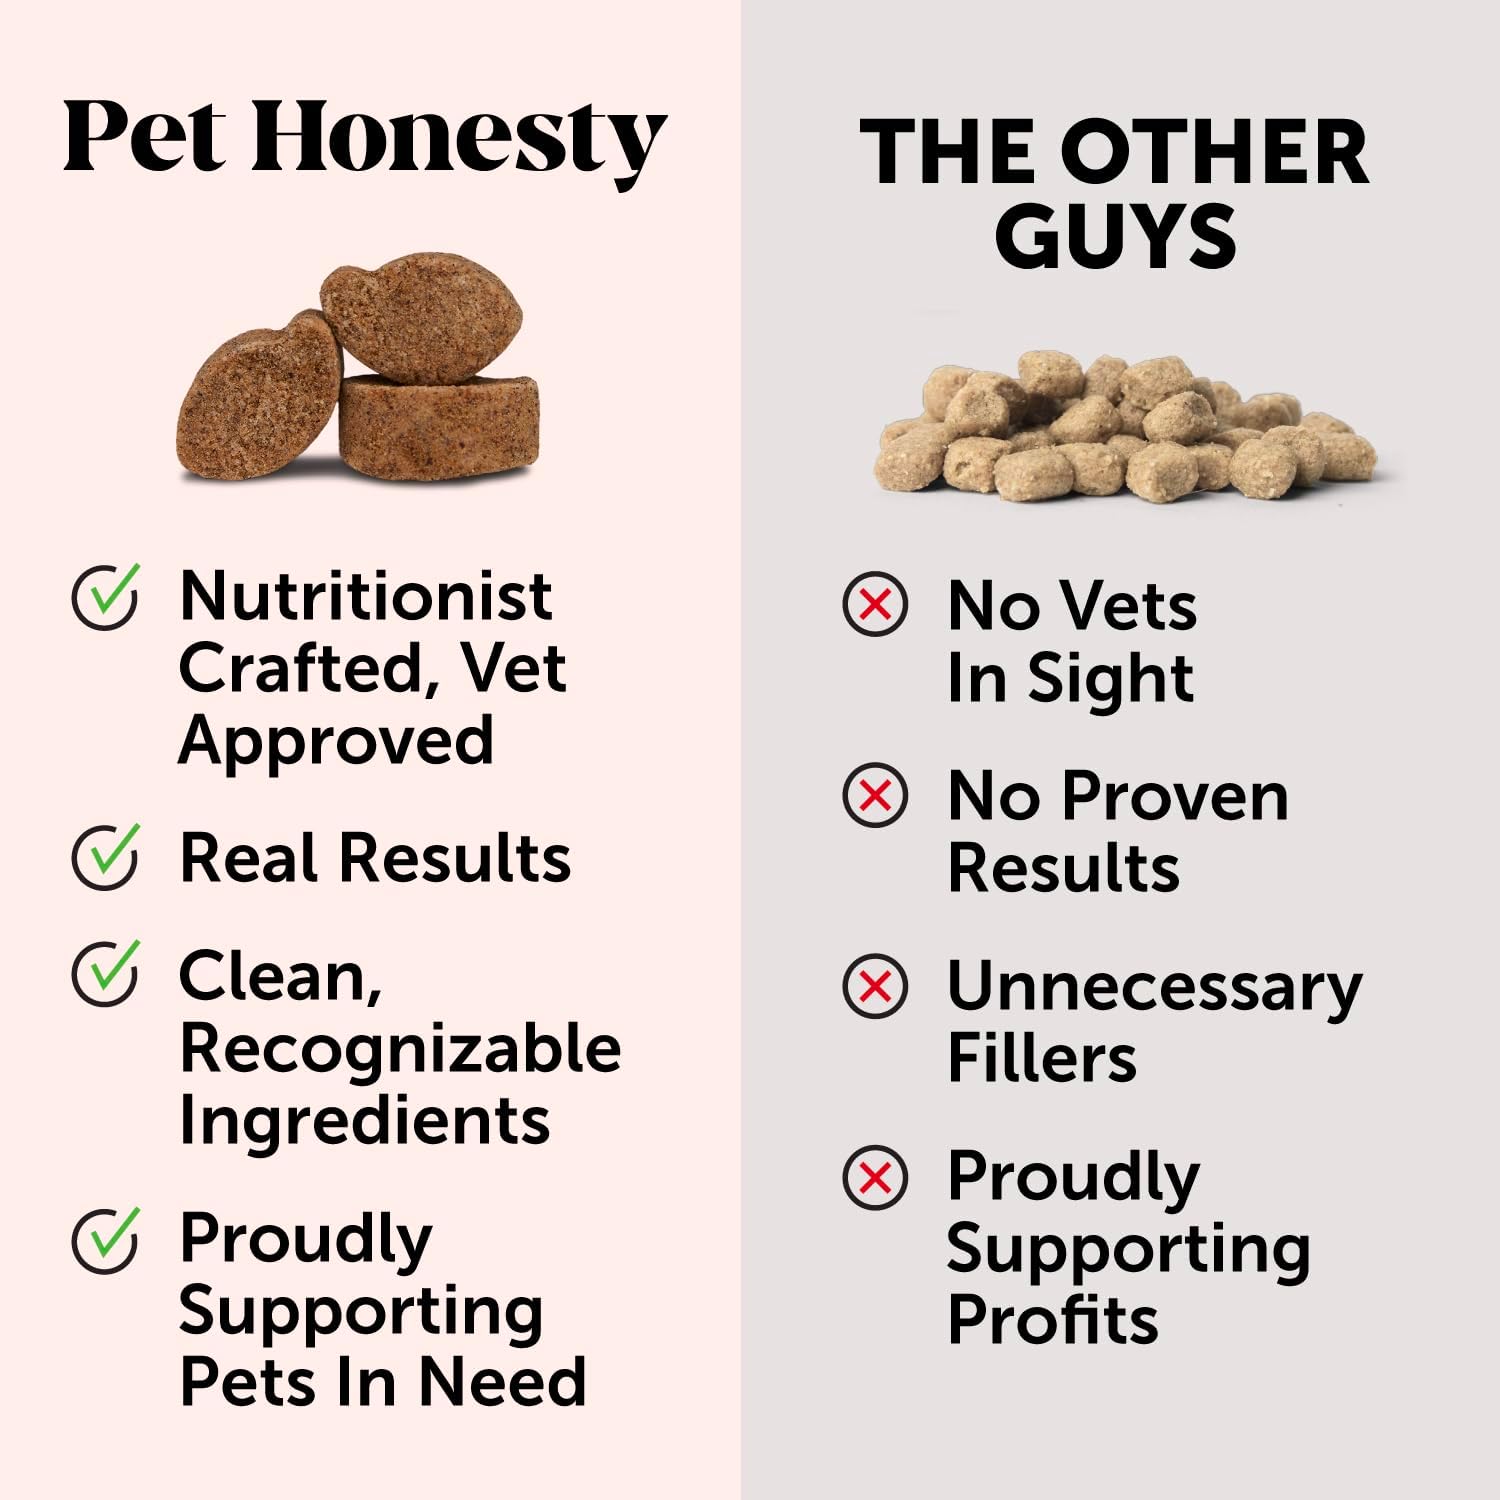 Pet Honesty Hemp Calming Chews for Dogs - Dog Anxiety Relief, Dog Calming Treats with Hemp + Valerian Root, Melatonin for Dogs - Helps Aid with Thunder, Fireworks, Chewing & Barking (Beef Liver) : Pet Supplies